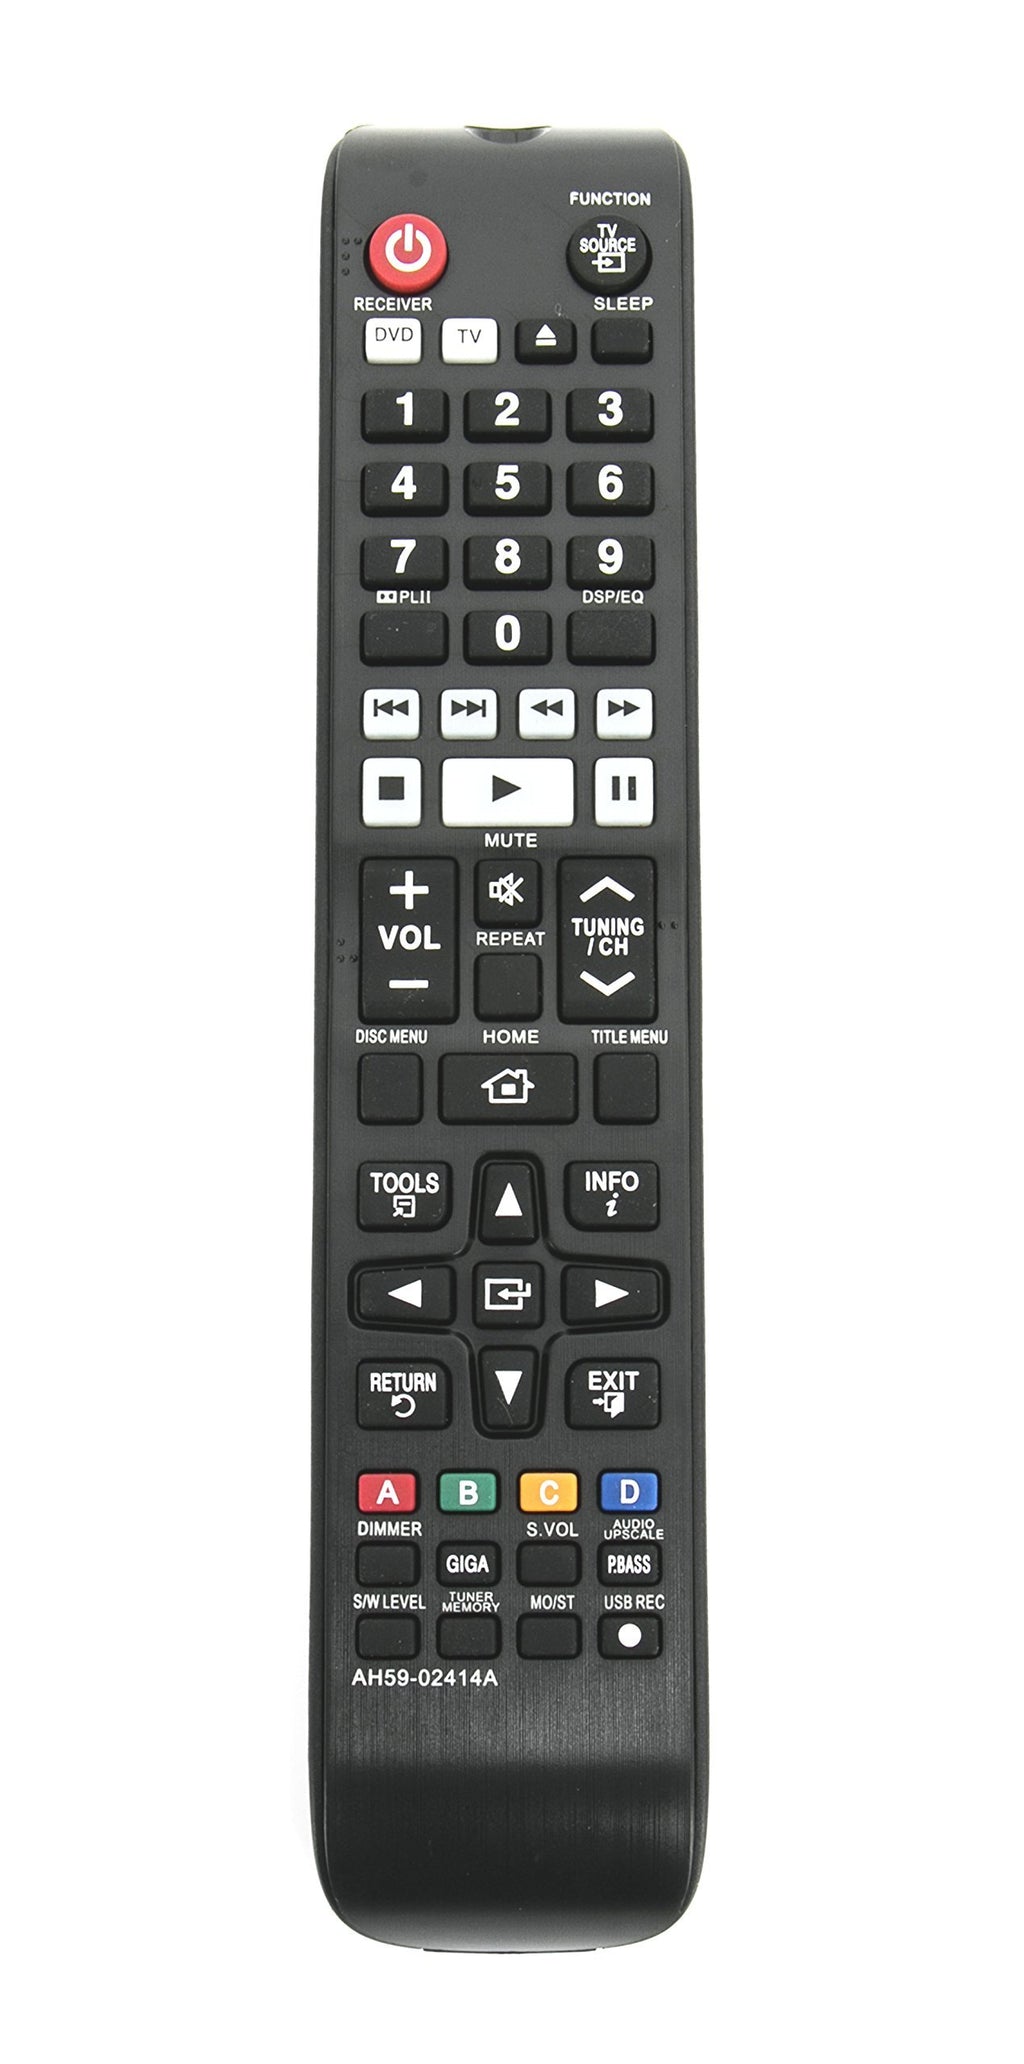 New AH59-02414A Replaced Remote fit for Samsung HT-E550/ZA HT-E550 HT-E550ZA HT-E450 HT-E453 HT-E455 Digital Home Entertainment System